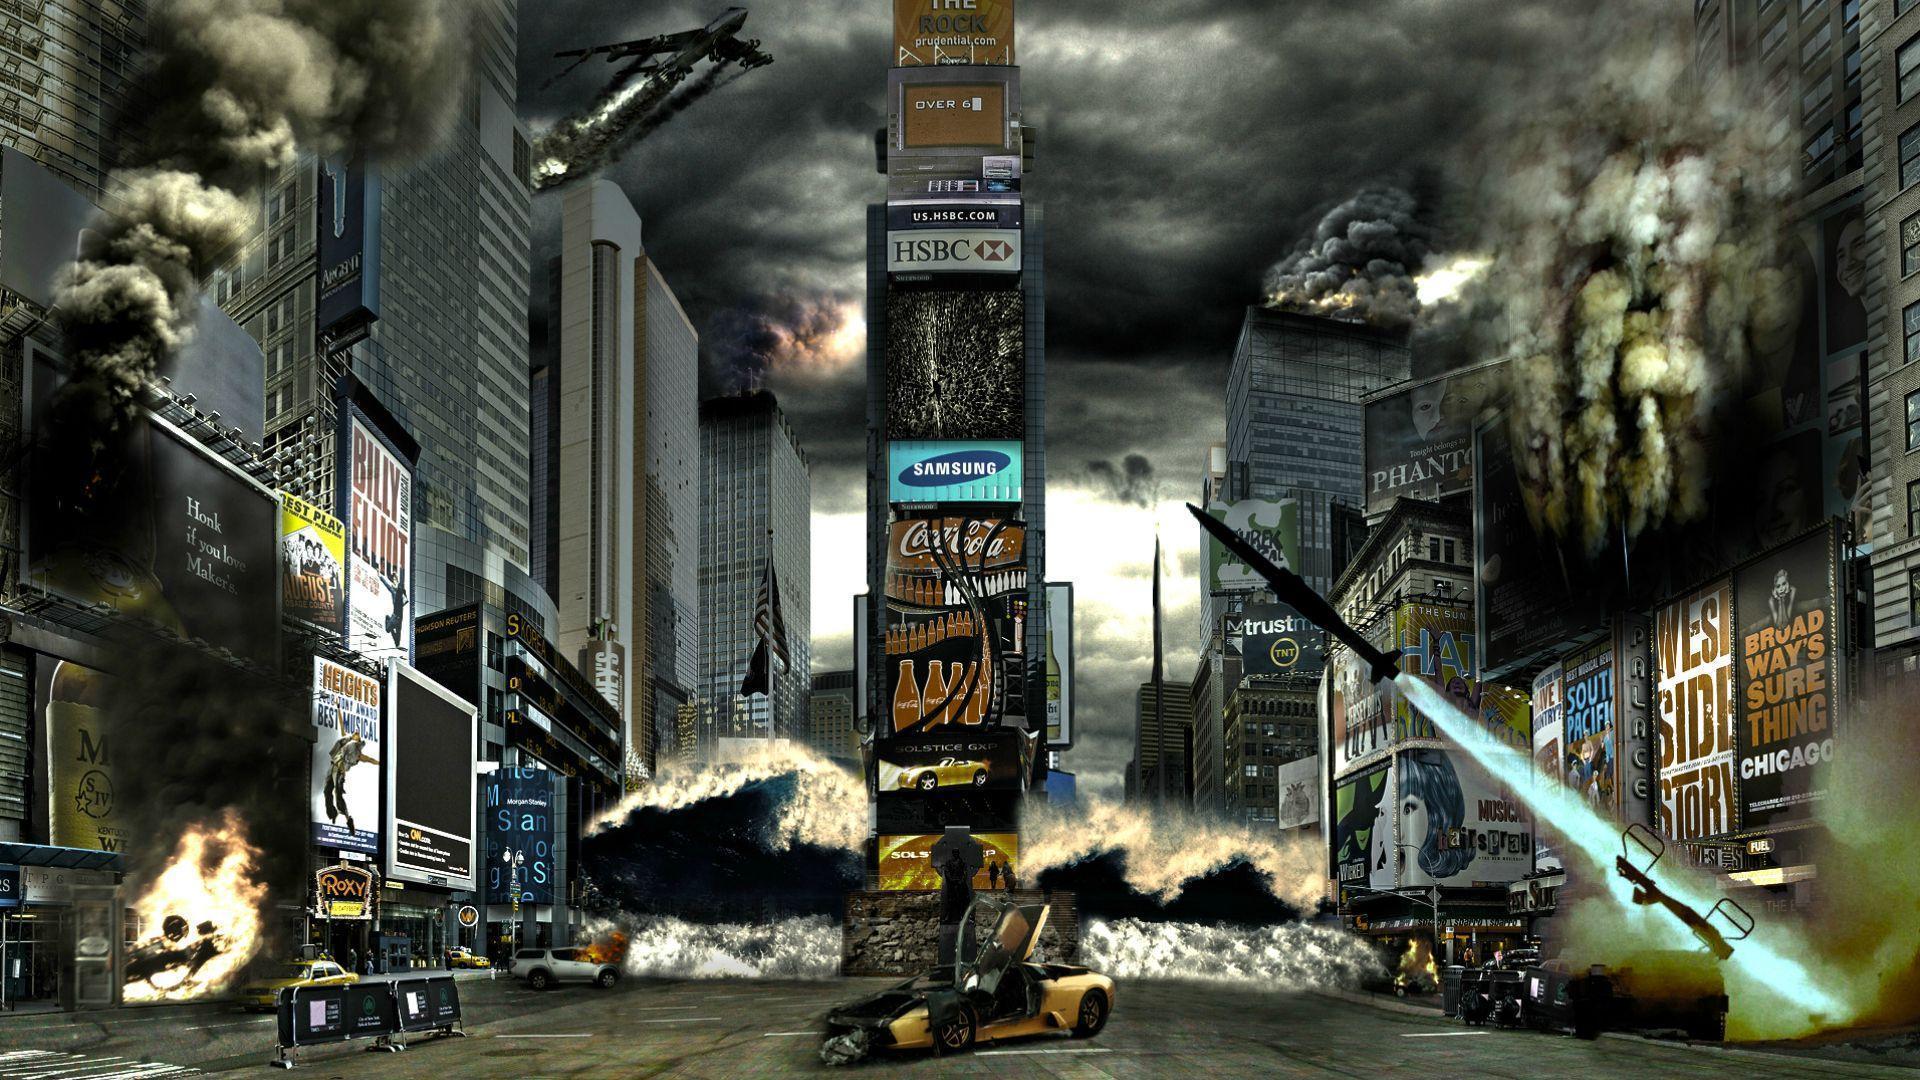 Times Square Disaster wallpaper. Times Square Disaster